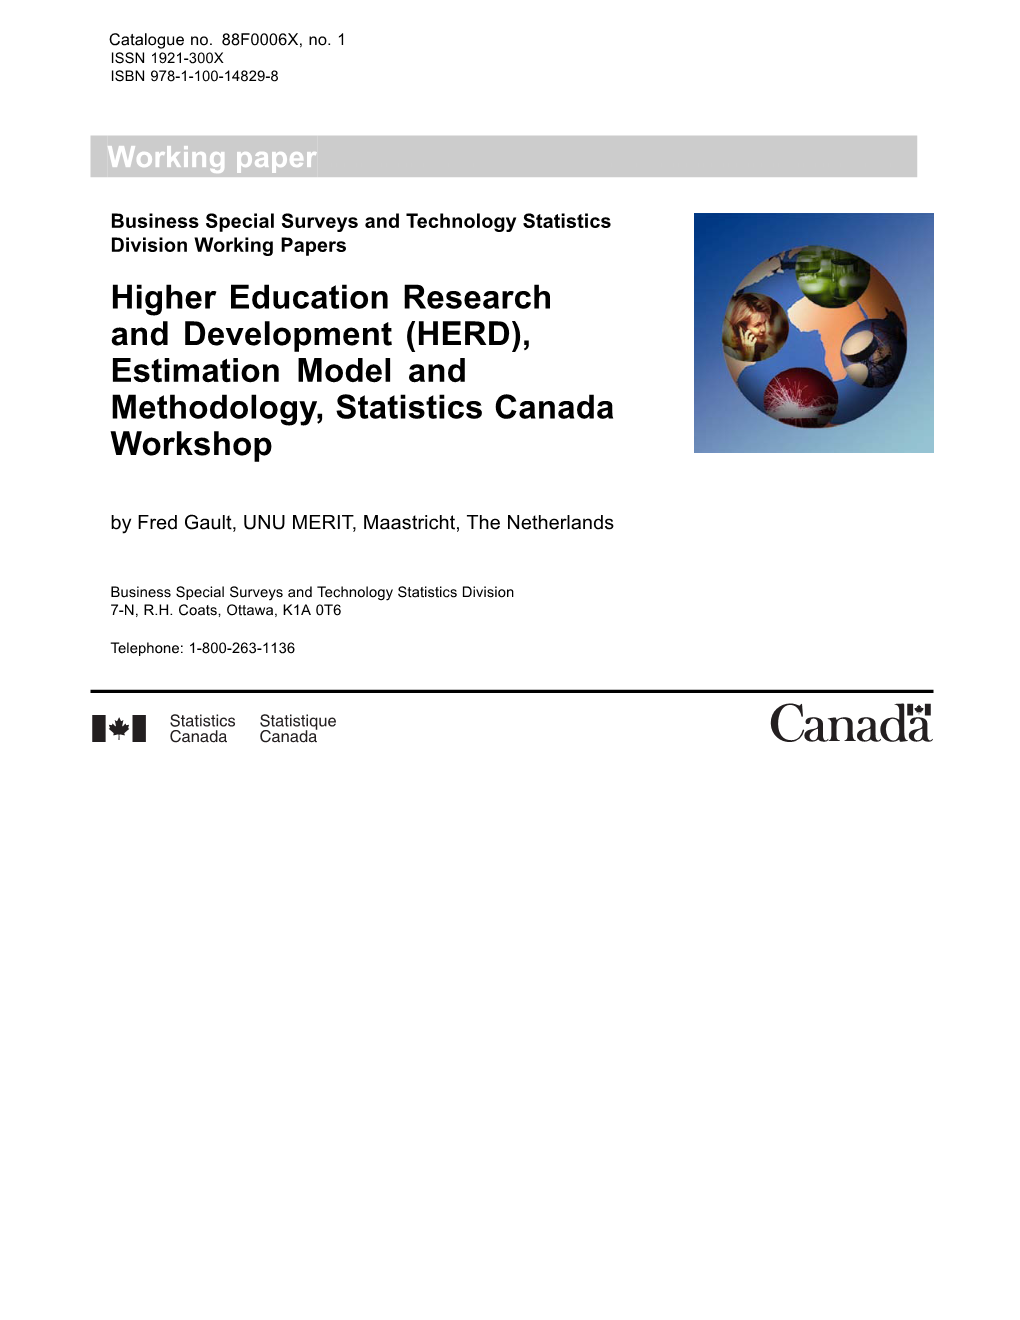 Higher Education Research and Development (HERD), Estimation Model and Methodology, Statistics Canada Workshop